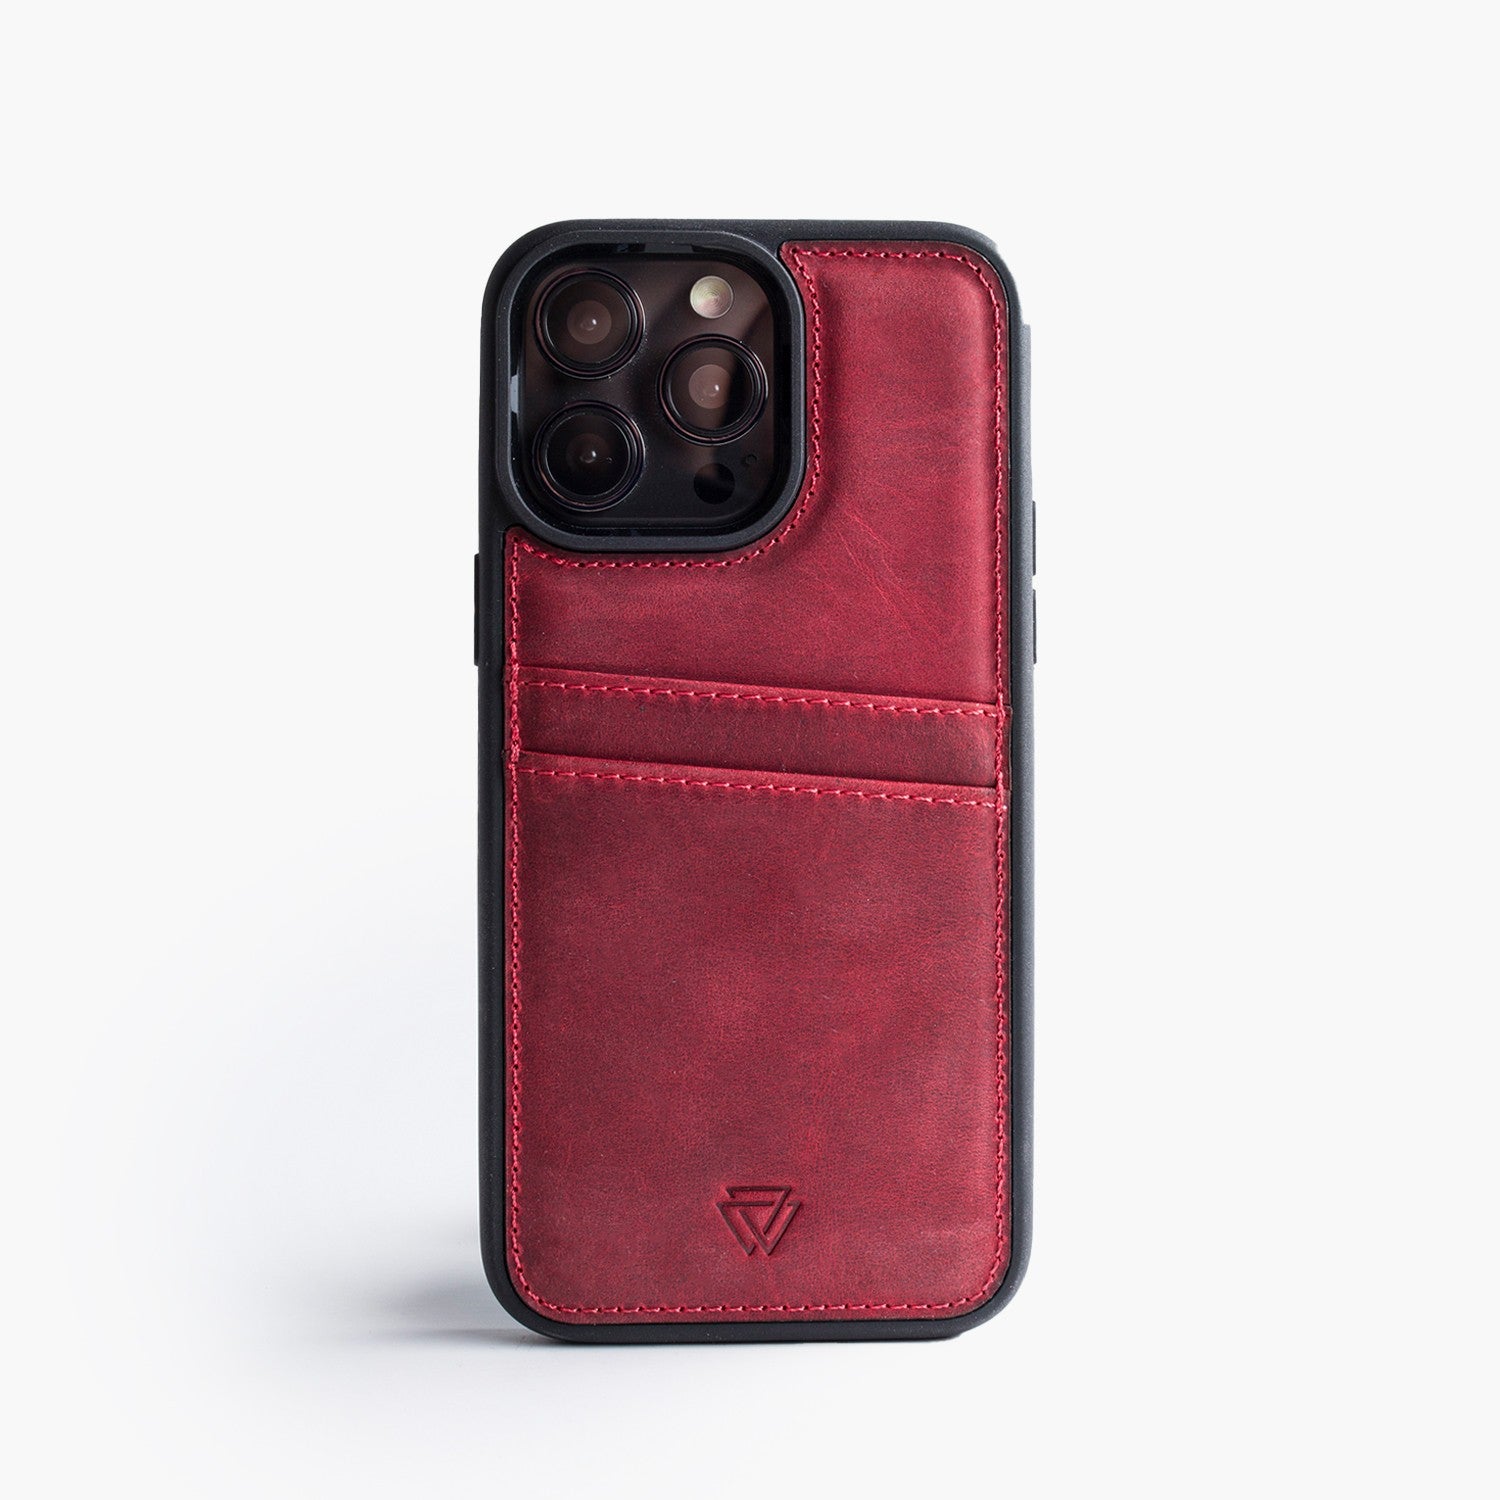 Wachikopa leather Back Cover C.C. Case for iPhone 12 Red